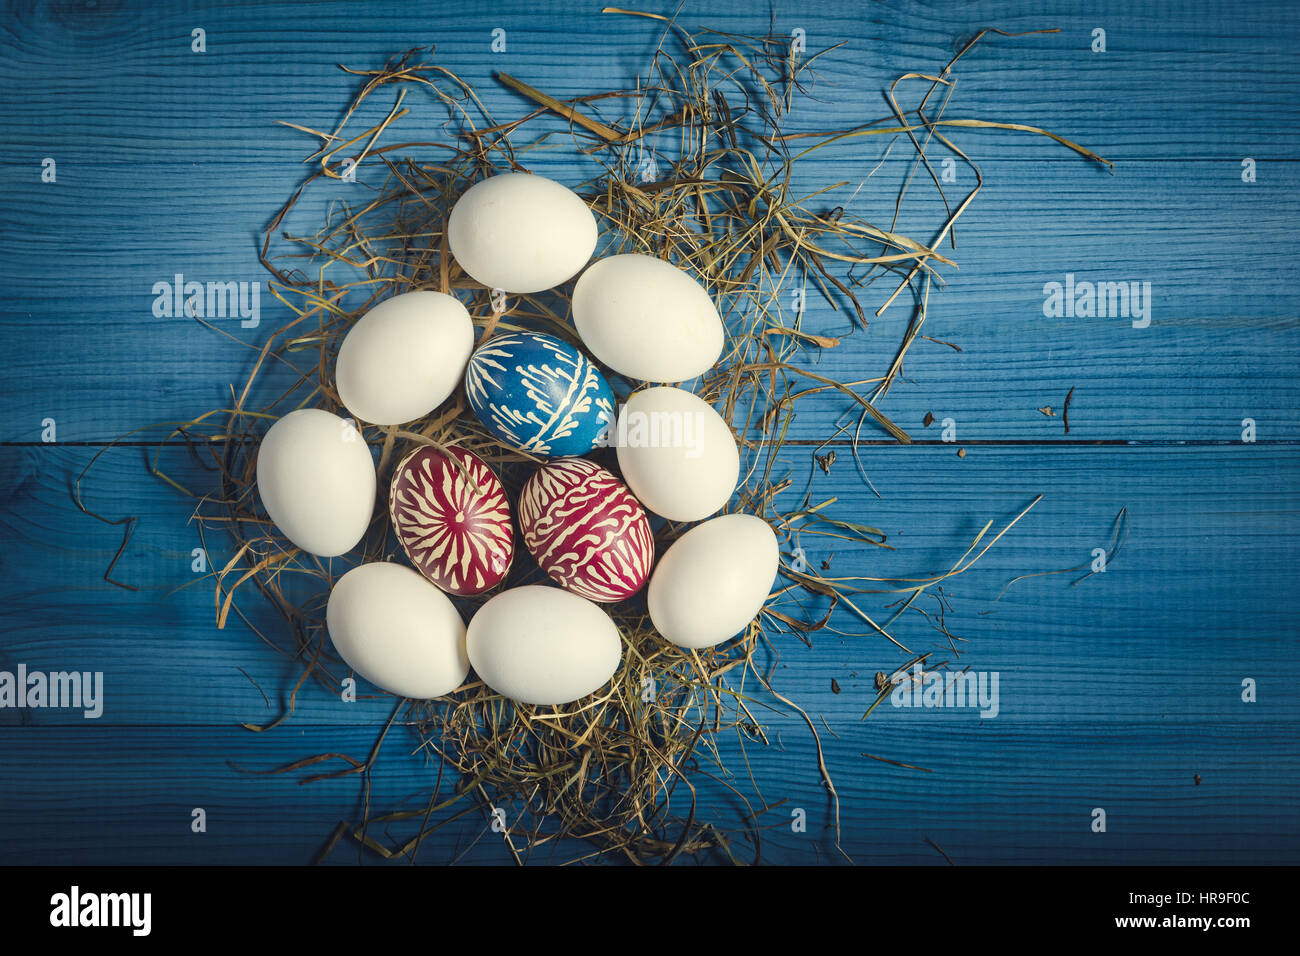 Group of easter eggs on the blue wooden surface. Easter concept. Stock Photo